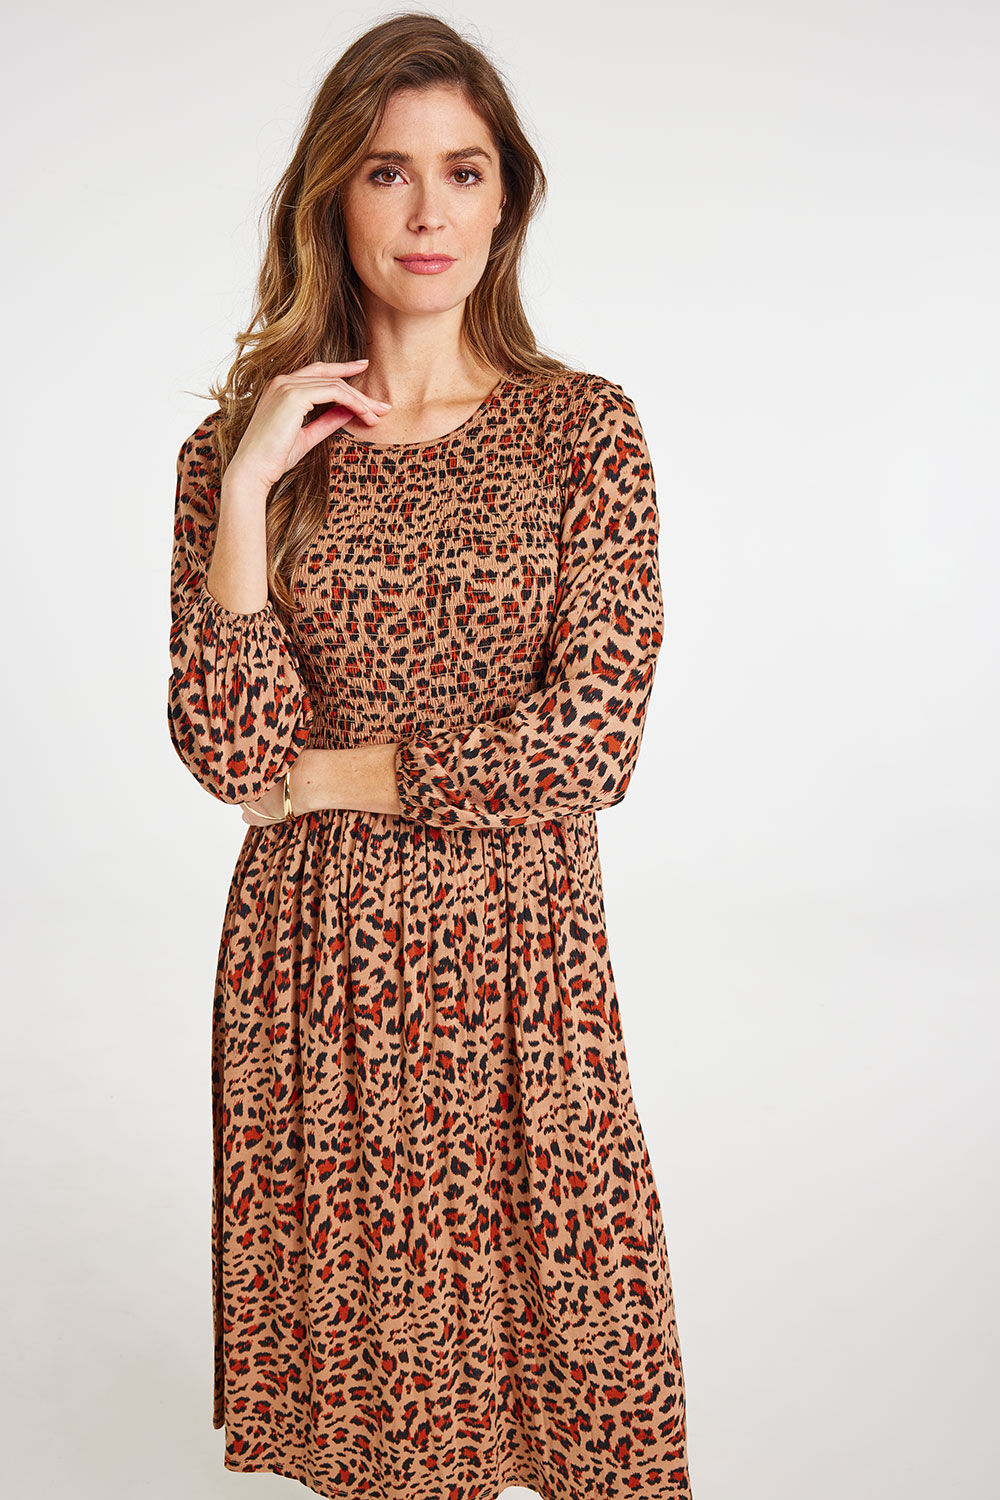 Bonmarche Brown Animal Print Shirred Bodice Jersey Dress, Size: 16 - Summer Clothes